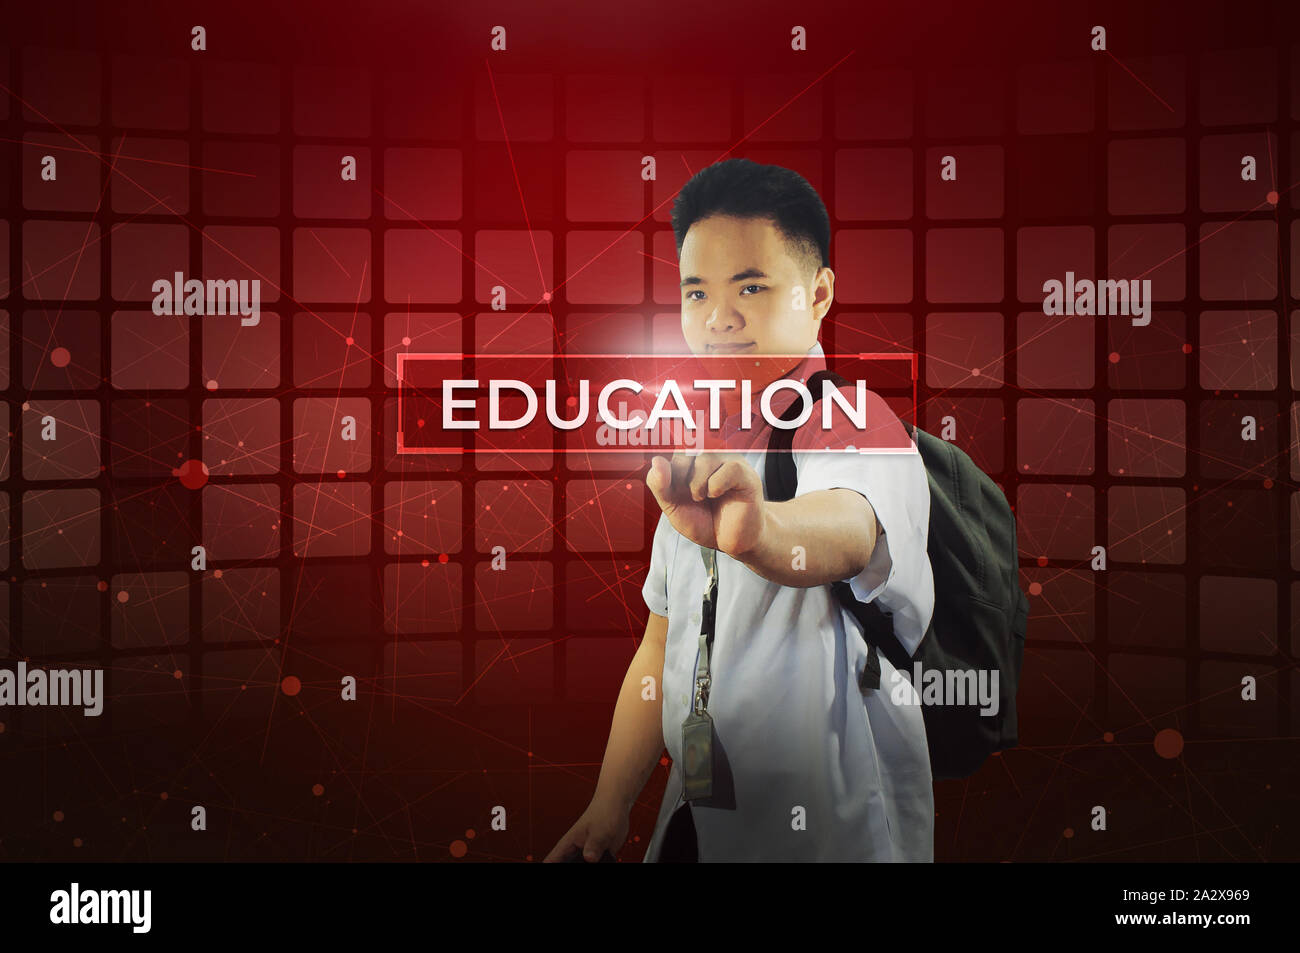 Student touching virtual screen.  Young school boy touching a hologram display screen with labelled Education with study materials icons. Stock Photo